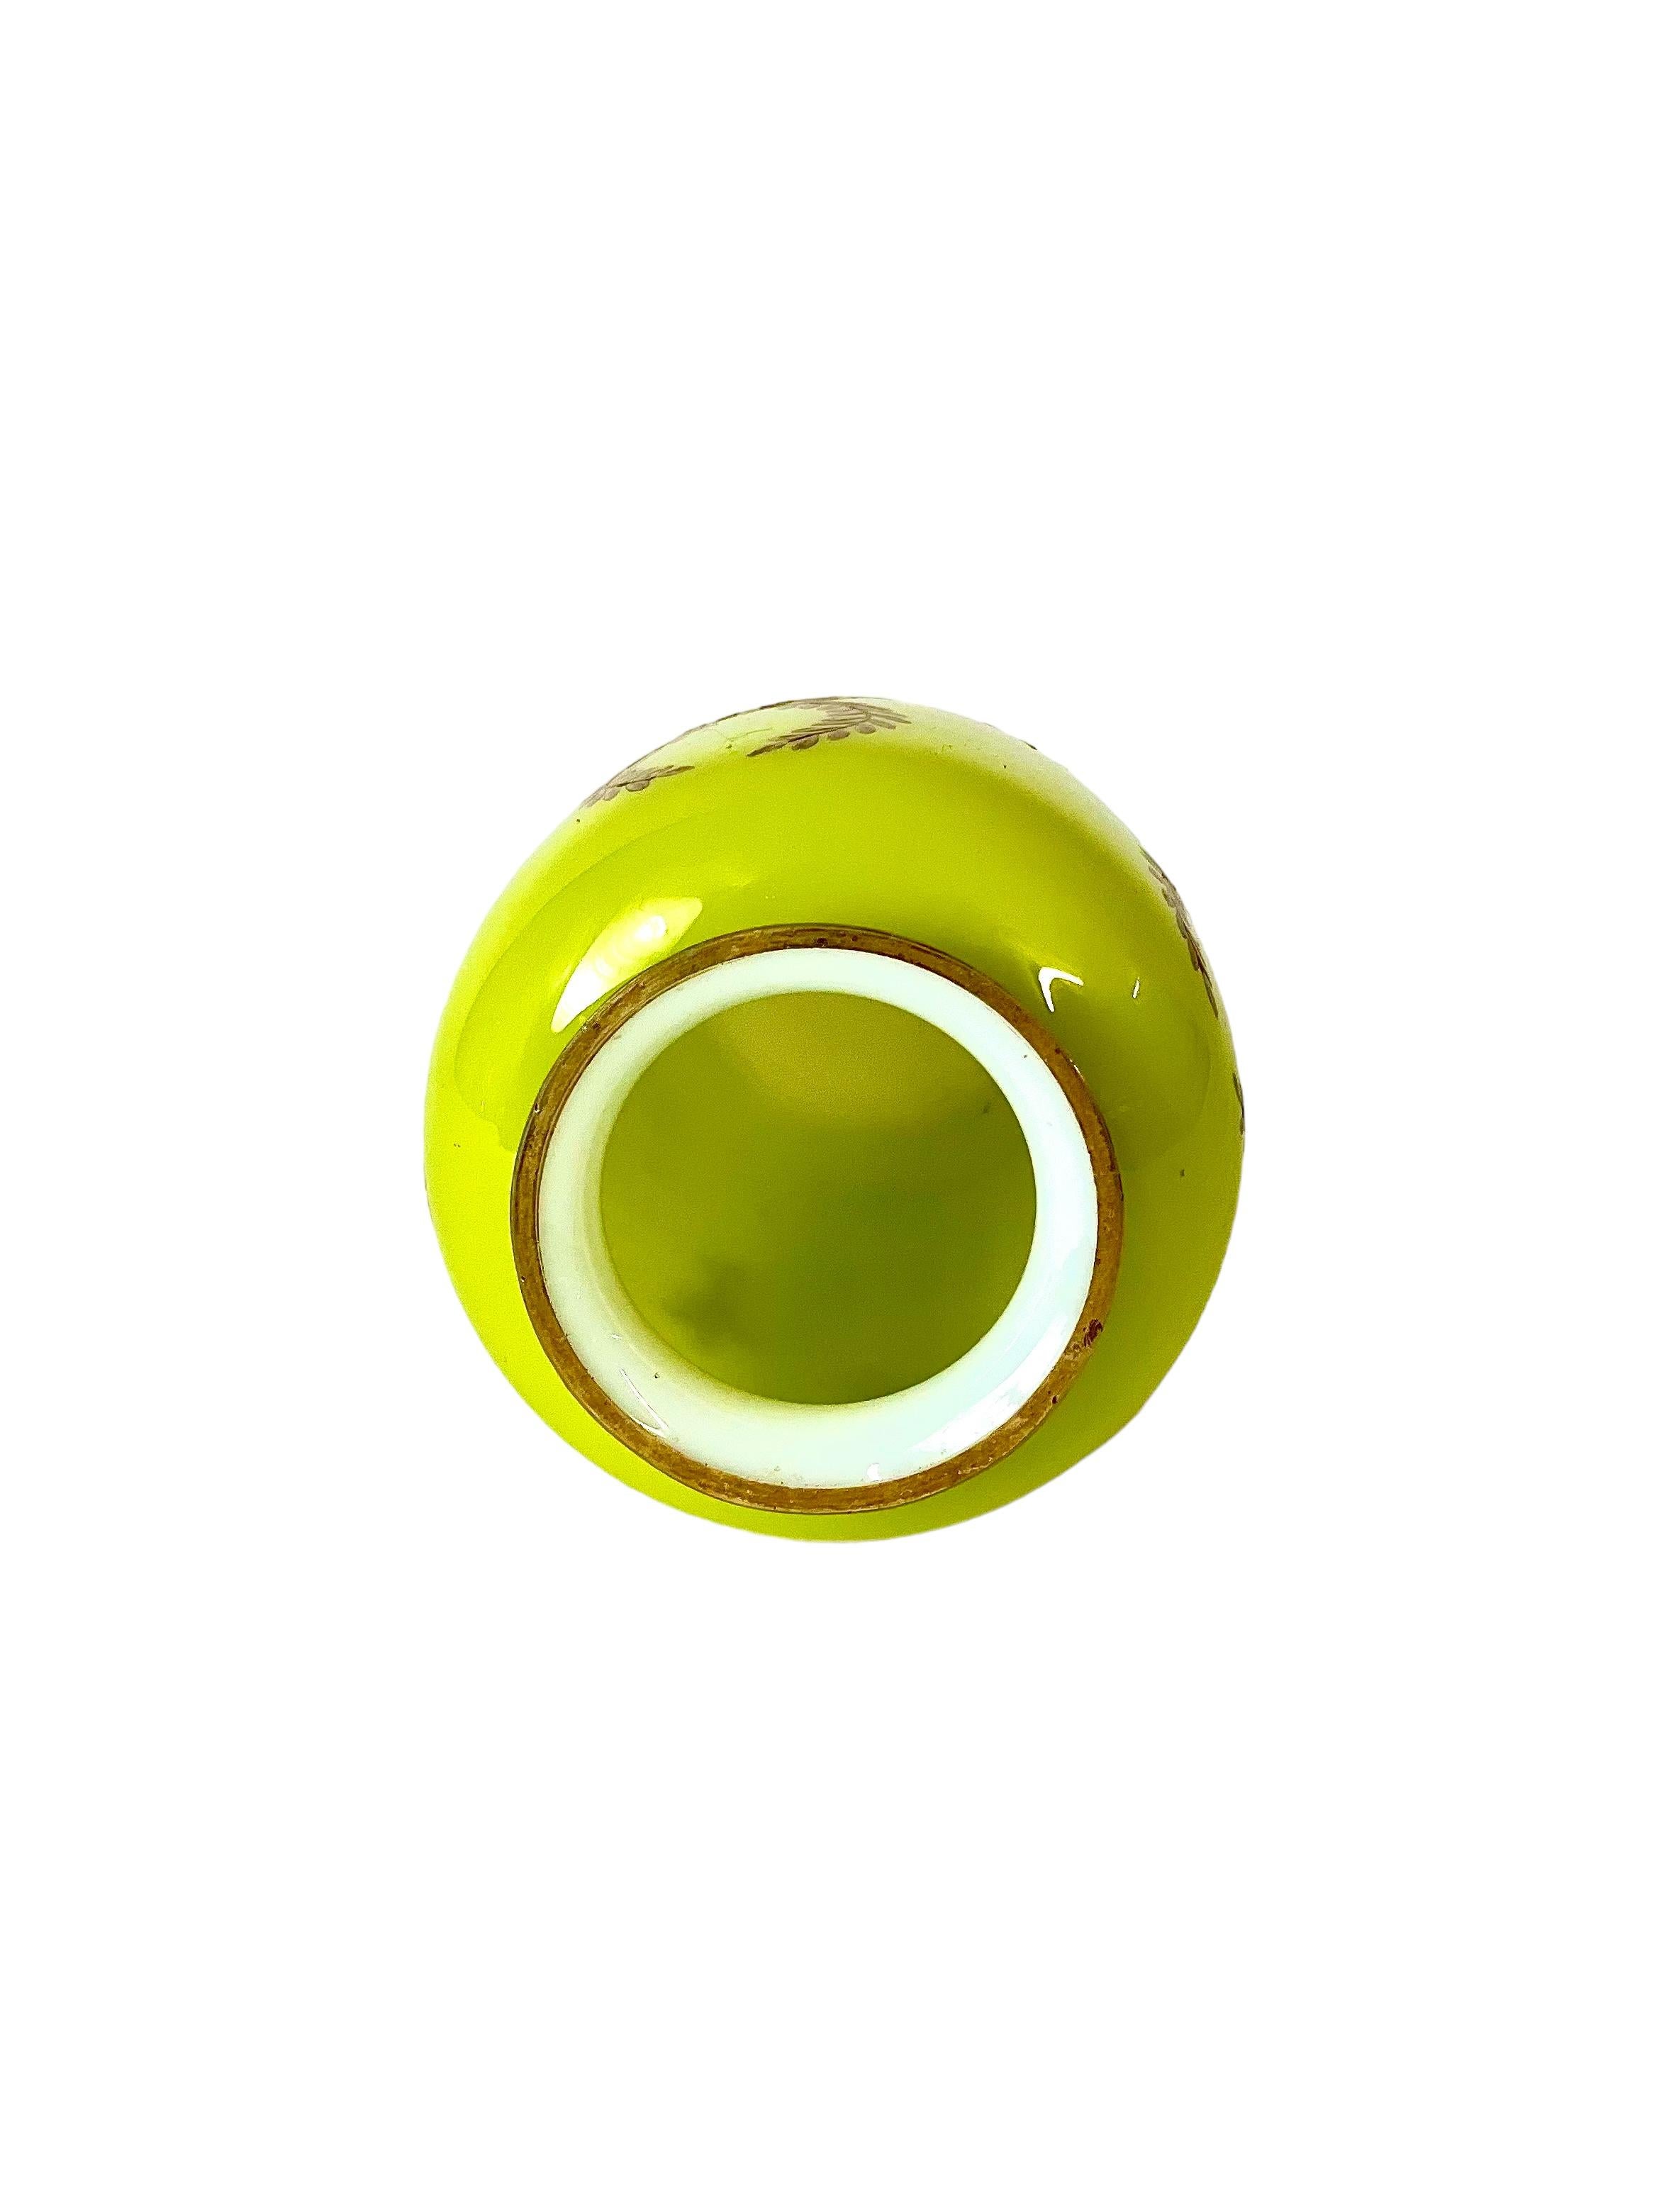 French Opaline Glass Vase in Chartreuse Yellow